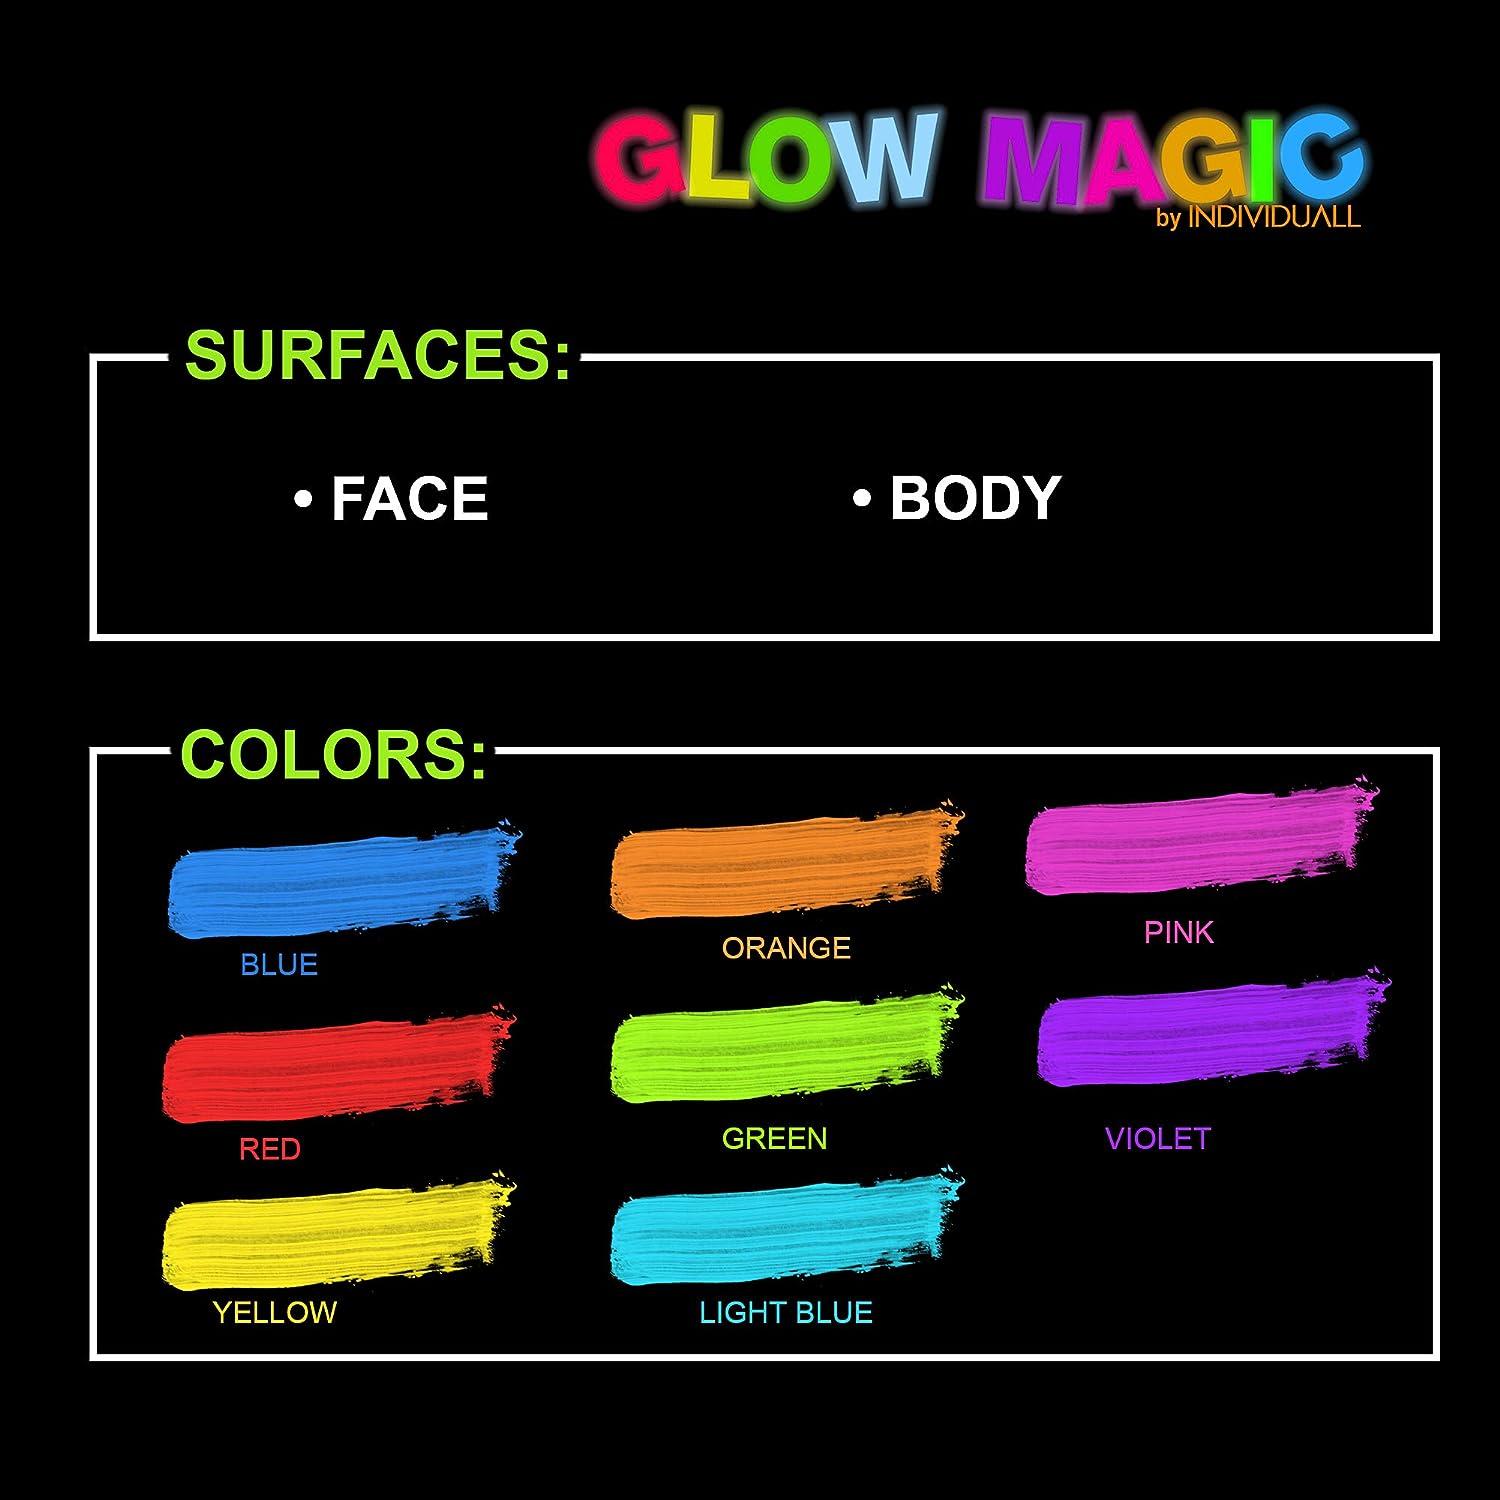 neon nights Glow-in-The-Dark Paint - Multi-Surface Acrylic Paints